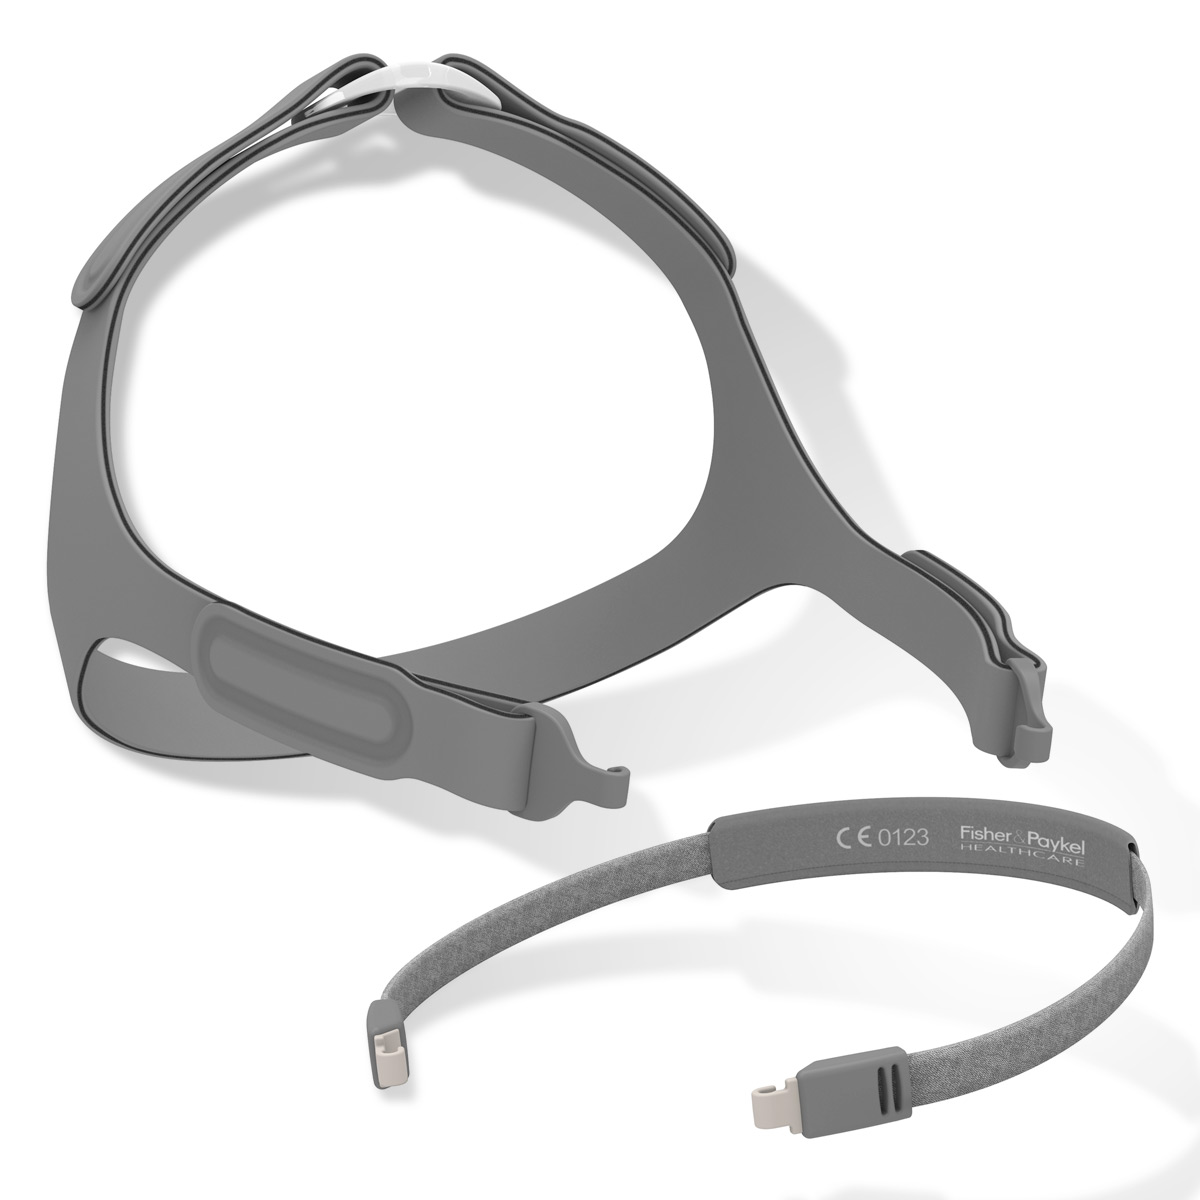 Fisher & Paykel Pilairo Nasal Pillow CPAP Mask Replacement Headgear product image